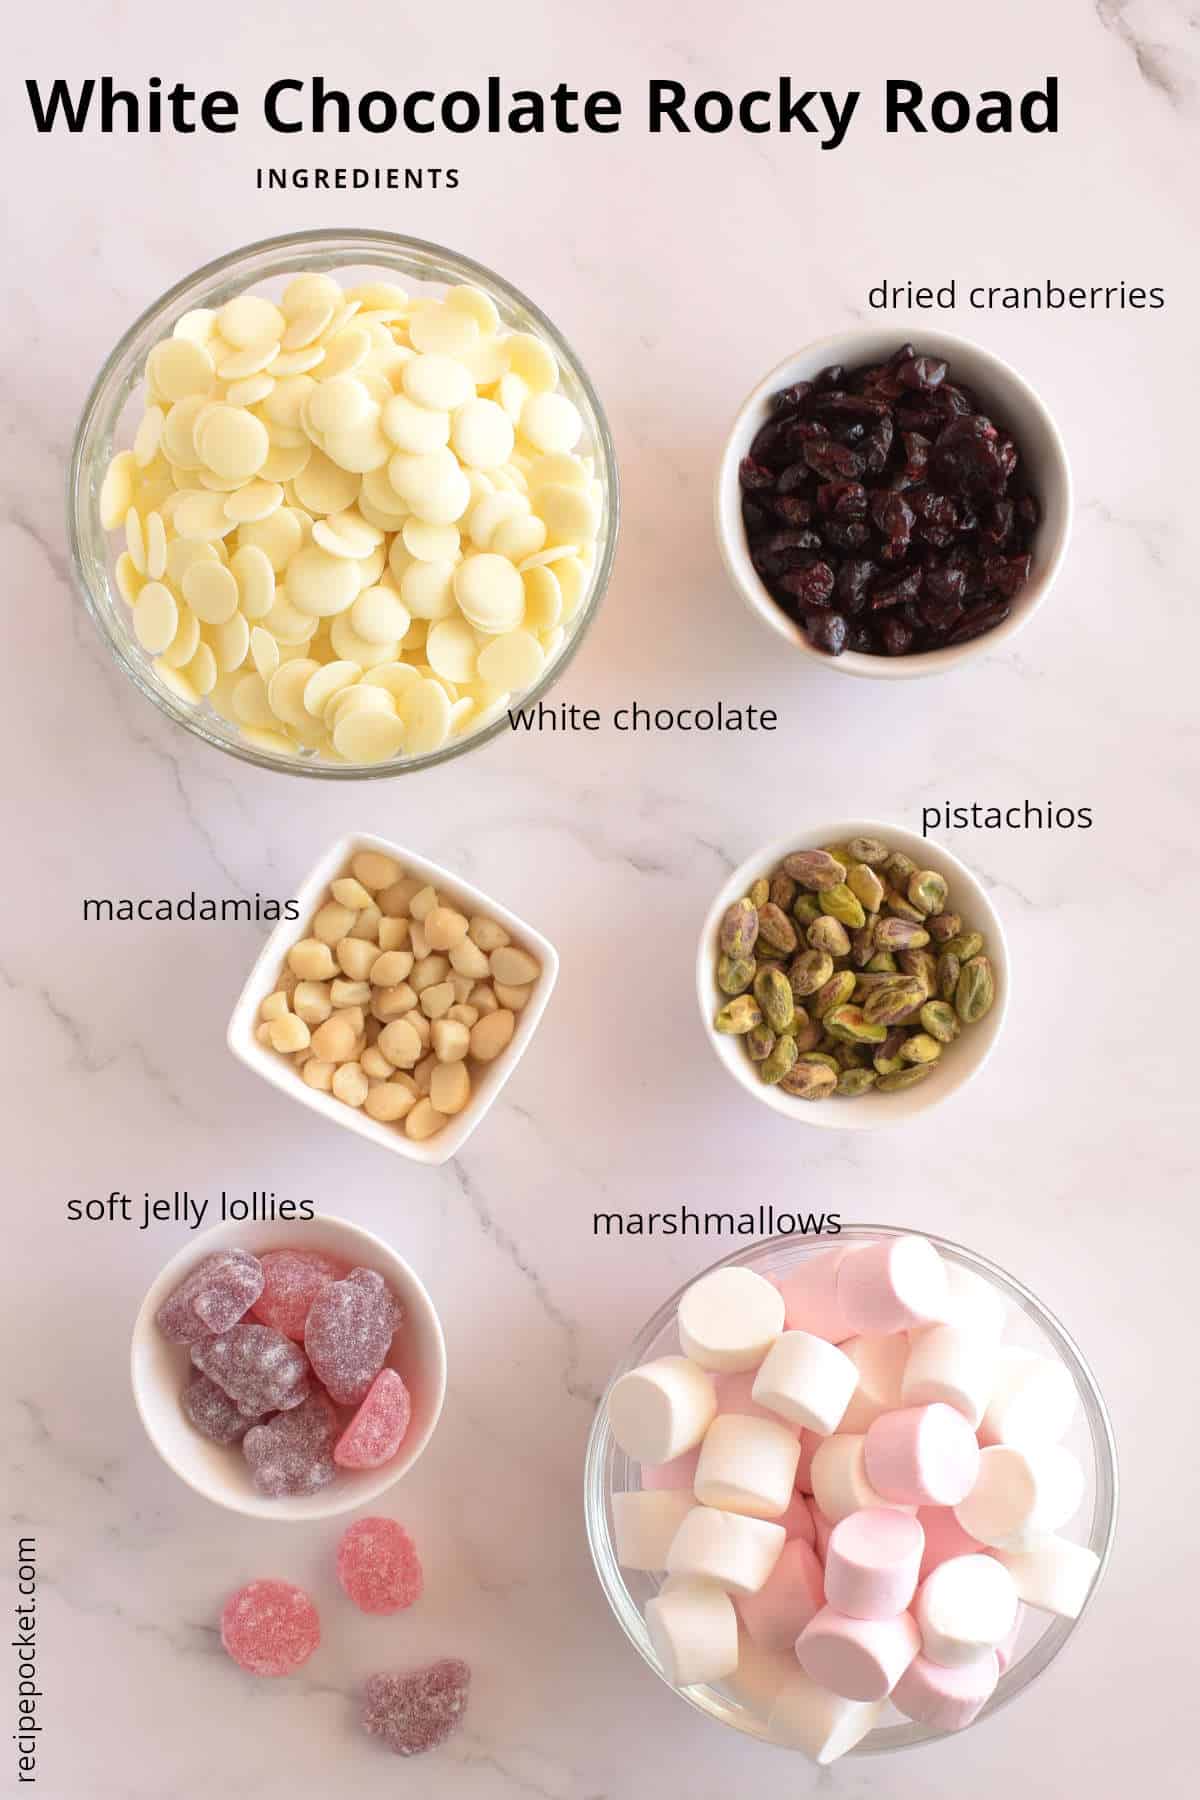 Ingredients for making rocky road.